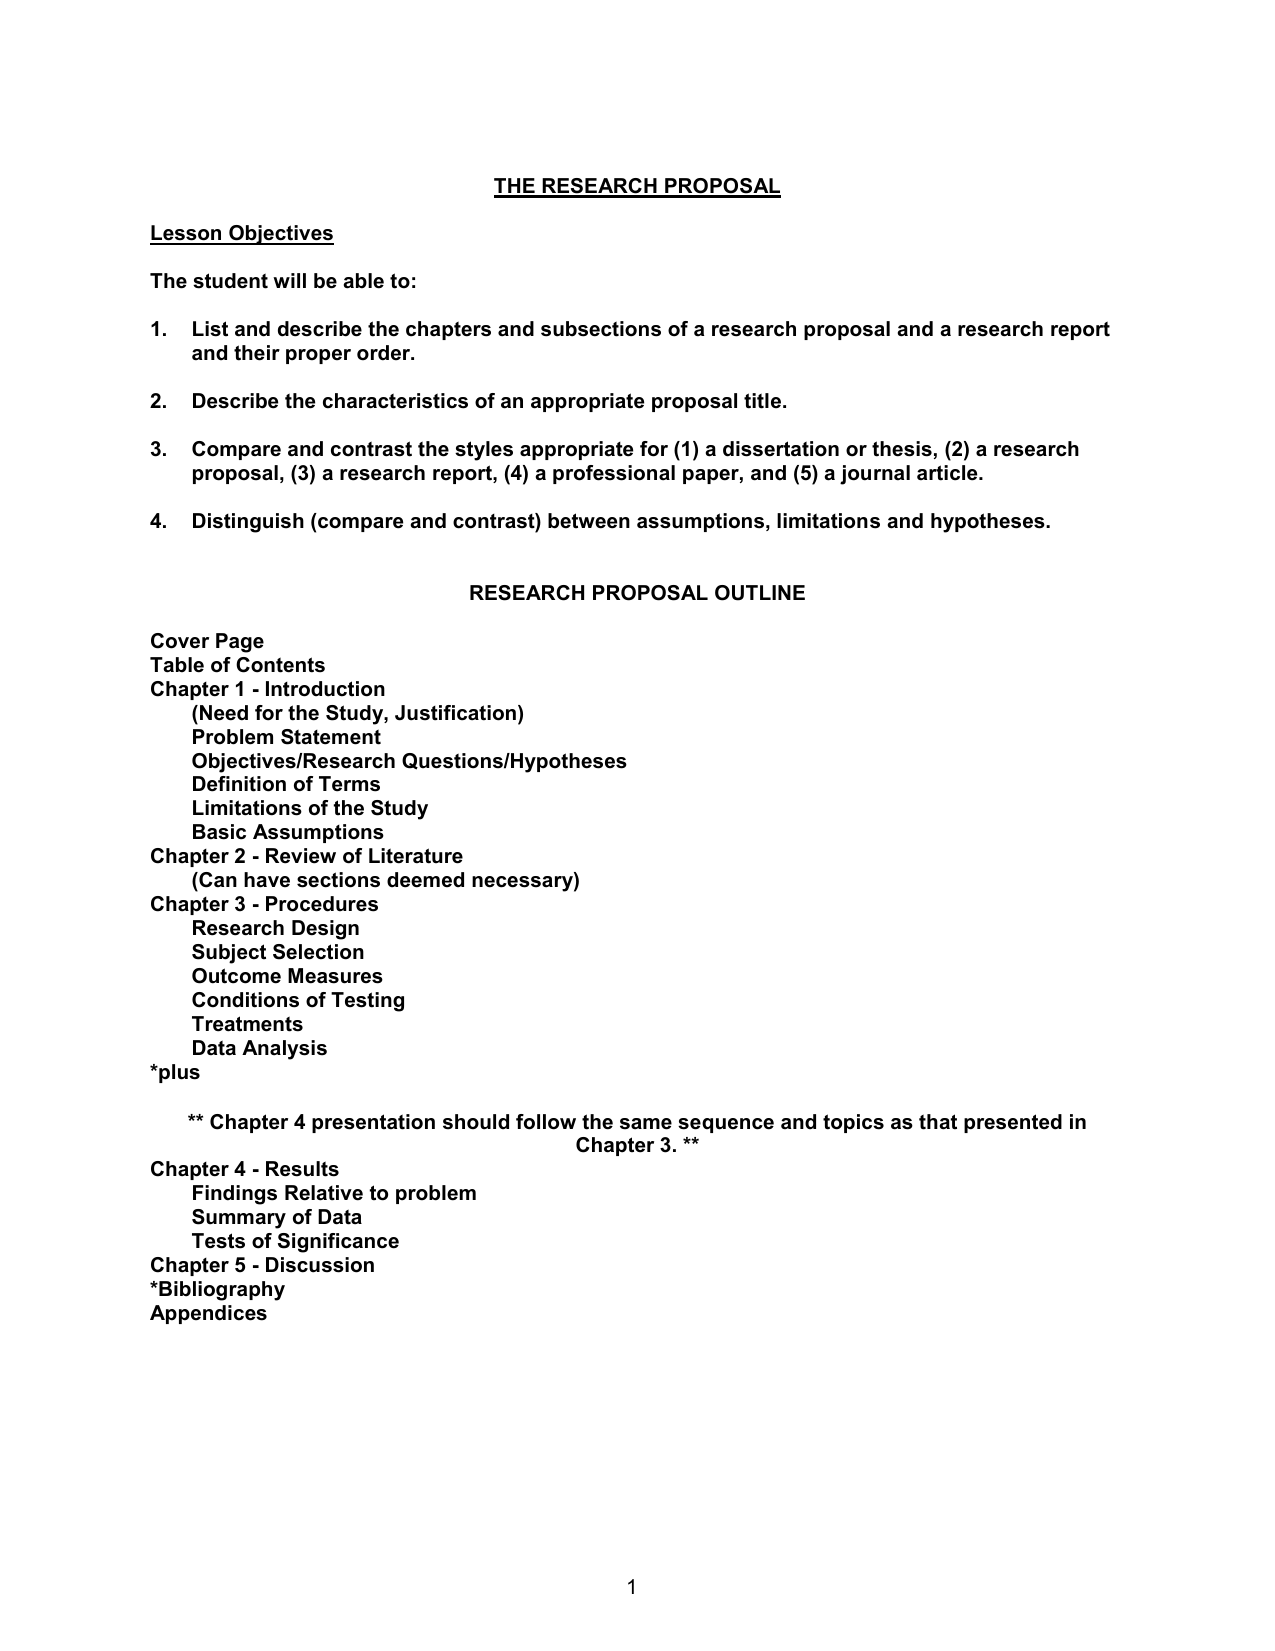 Sample construction and carpenter resume